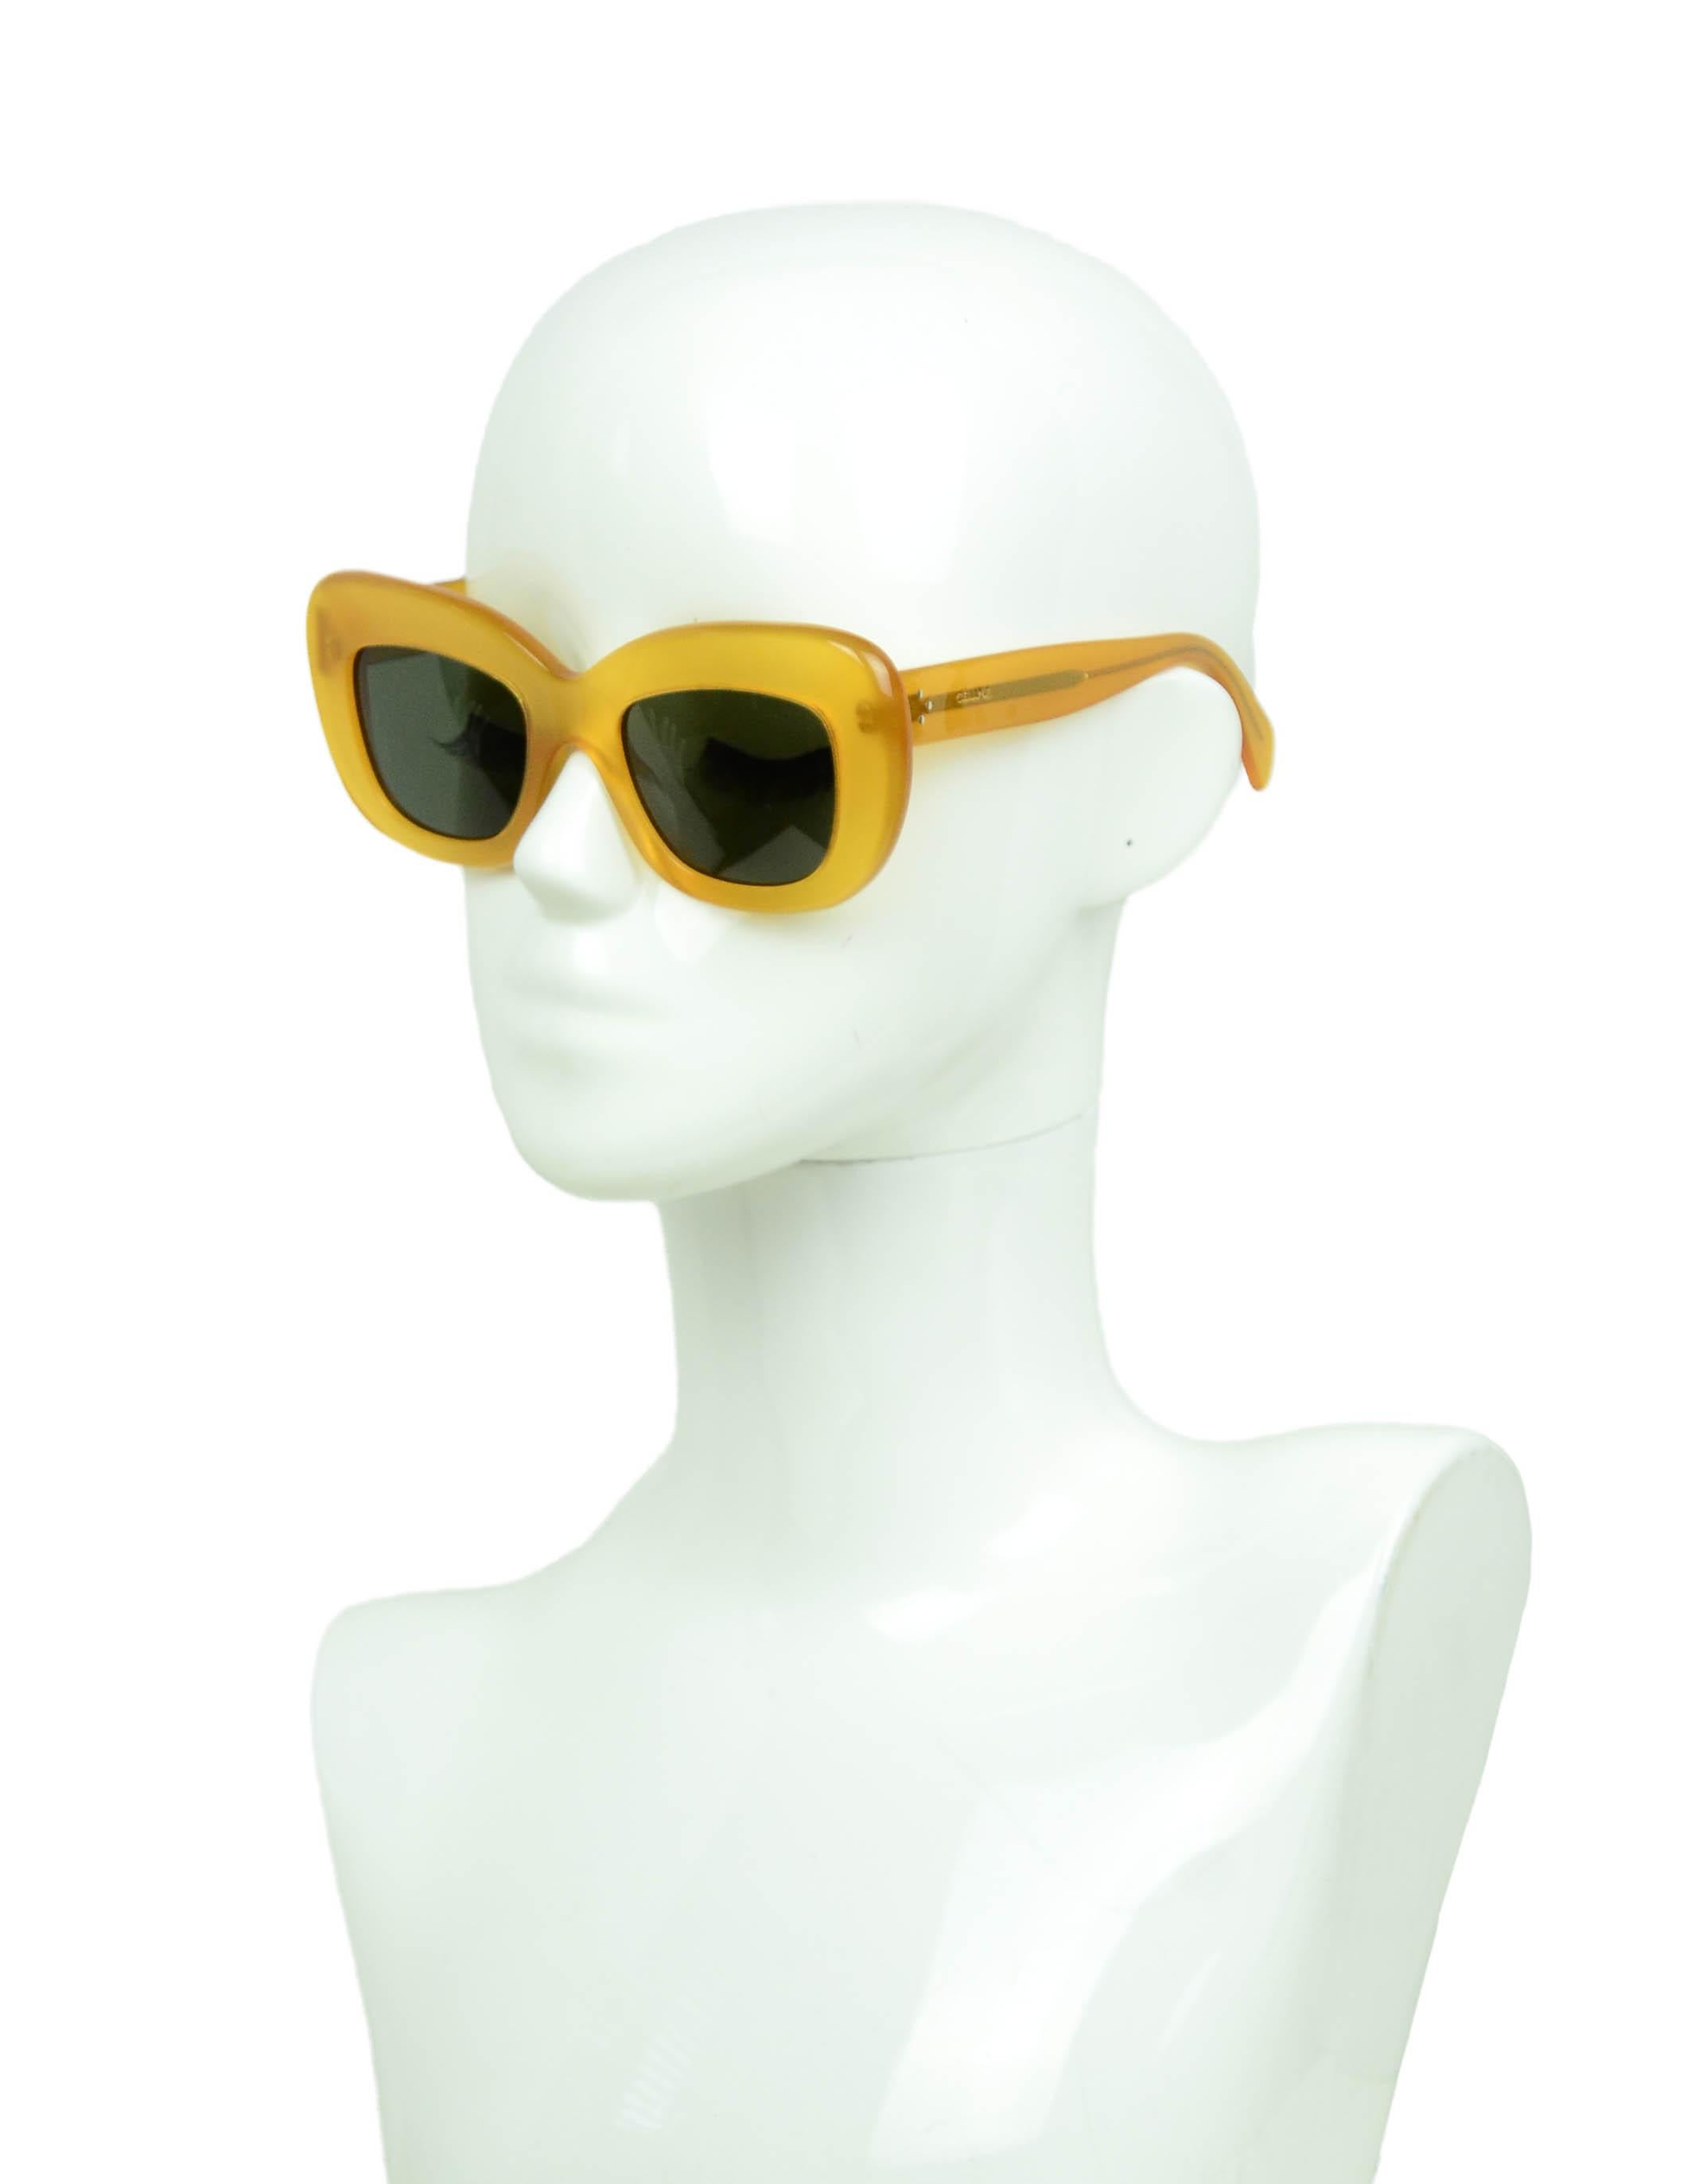 Celine Honey Diane Sunglasses CL41432/S

Made In: Italy
Color: Honey
Hardware: Silvertone
Materials: Resin
Overall Condition: Very good/excellent - hairline scratches on frames
Includes: Case

Measurements:
Length Across Front: 6”
Height: 2.25
Lens: